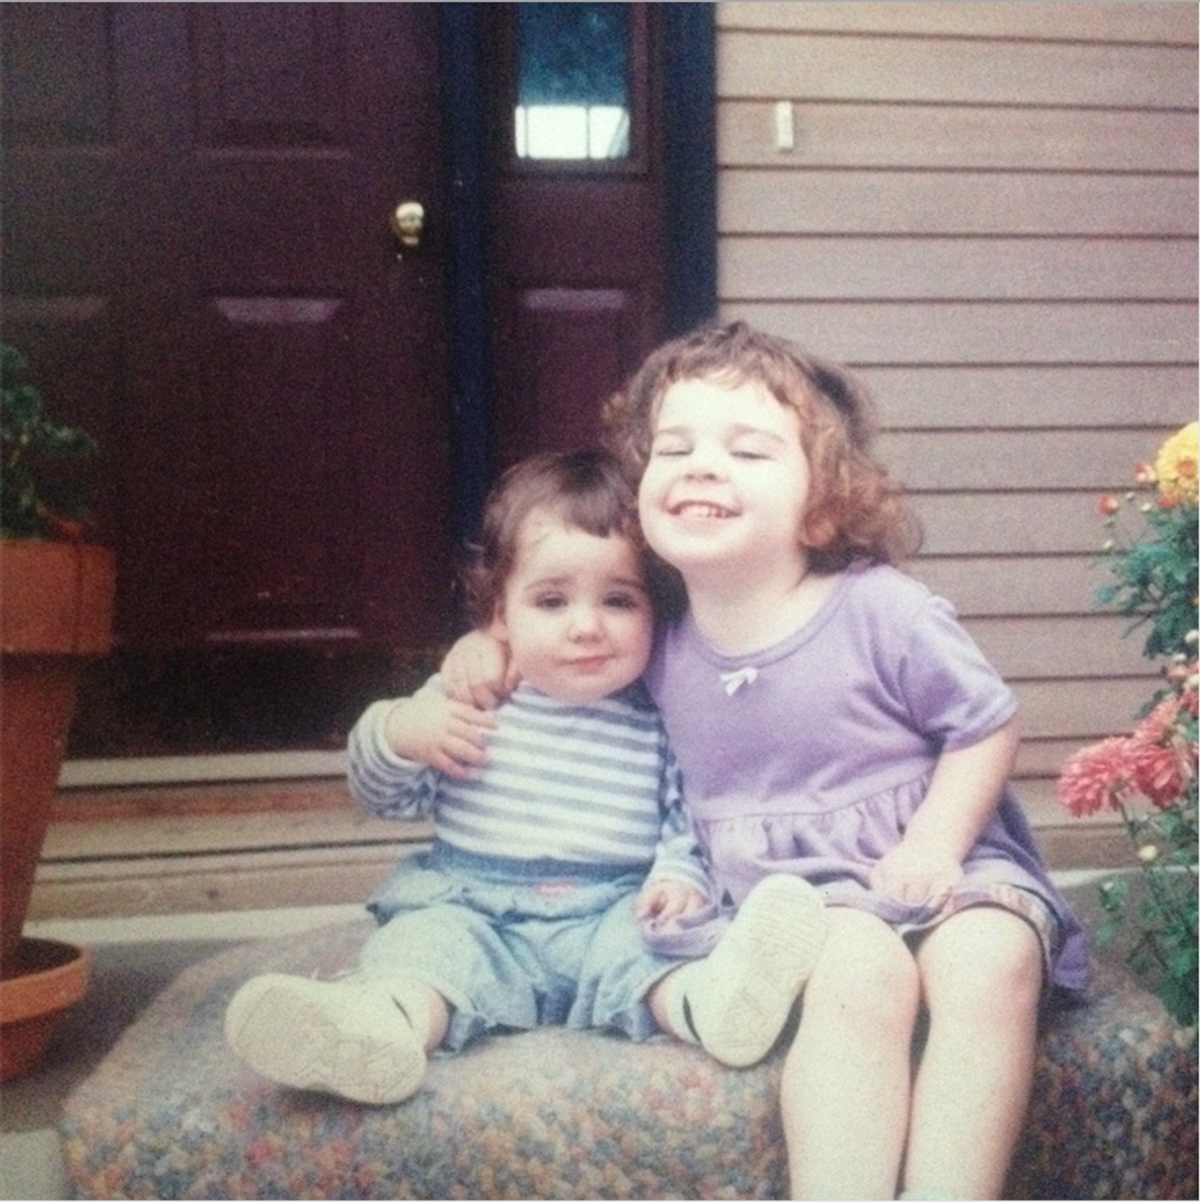 20 Lessons I've Learned From My Little Sister On Her 20th Birthday